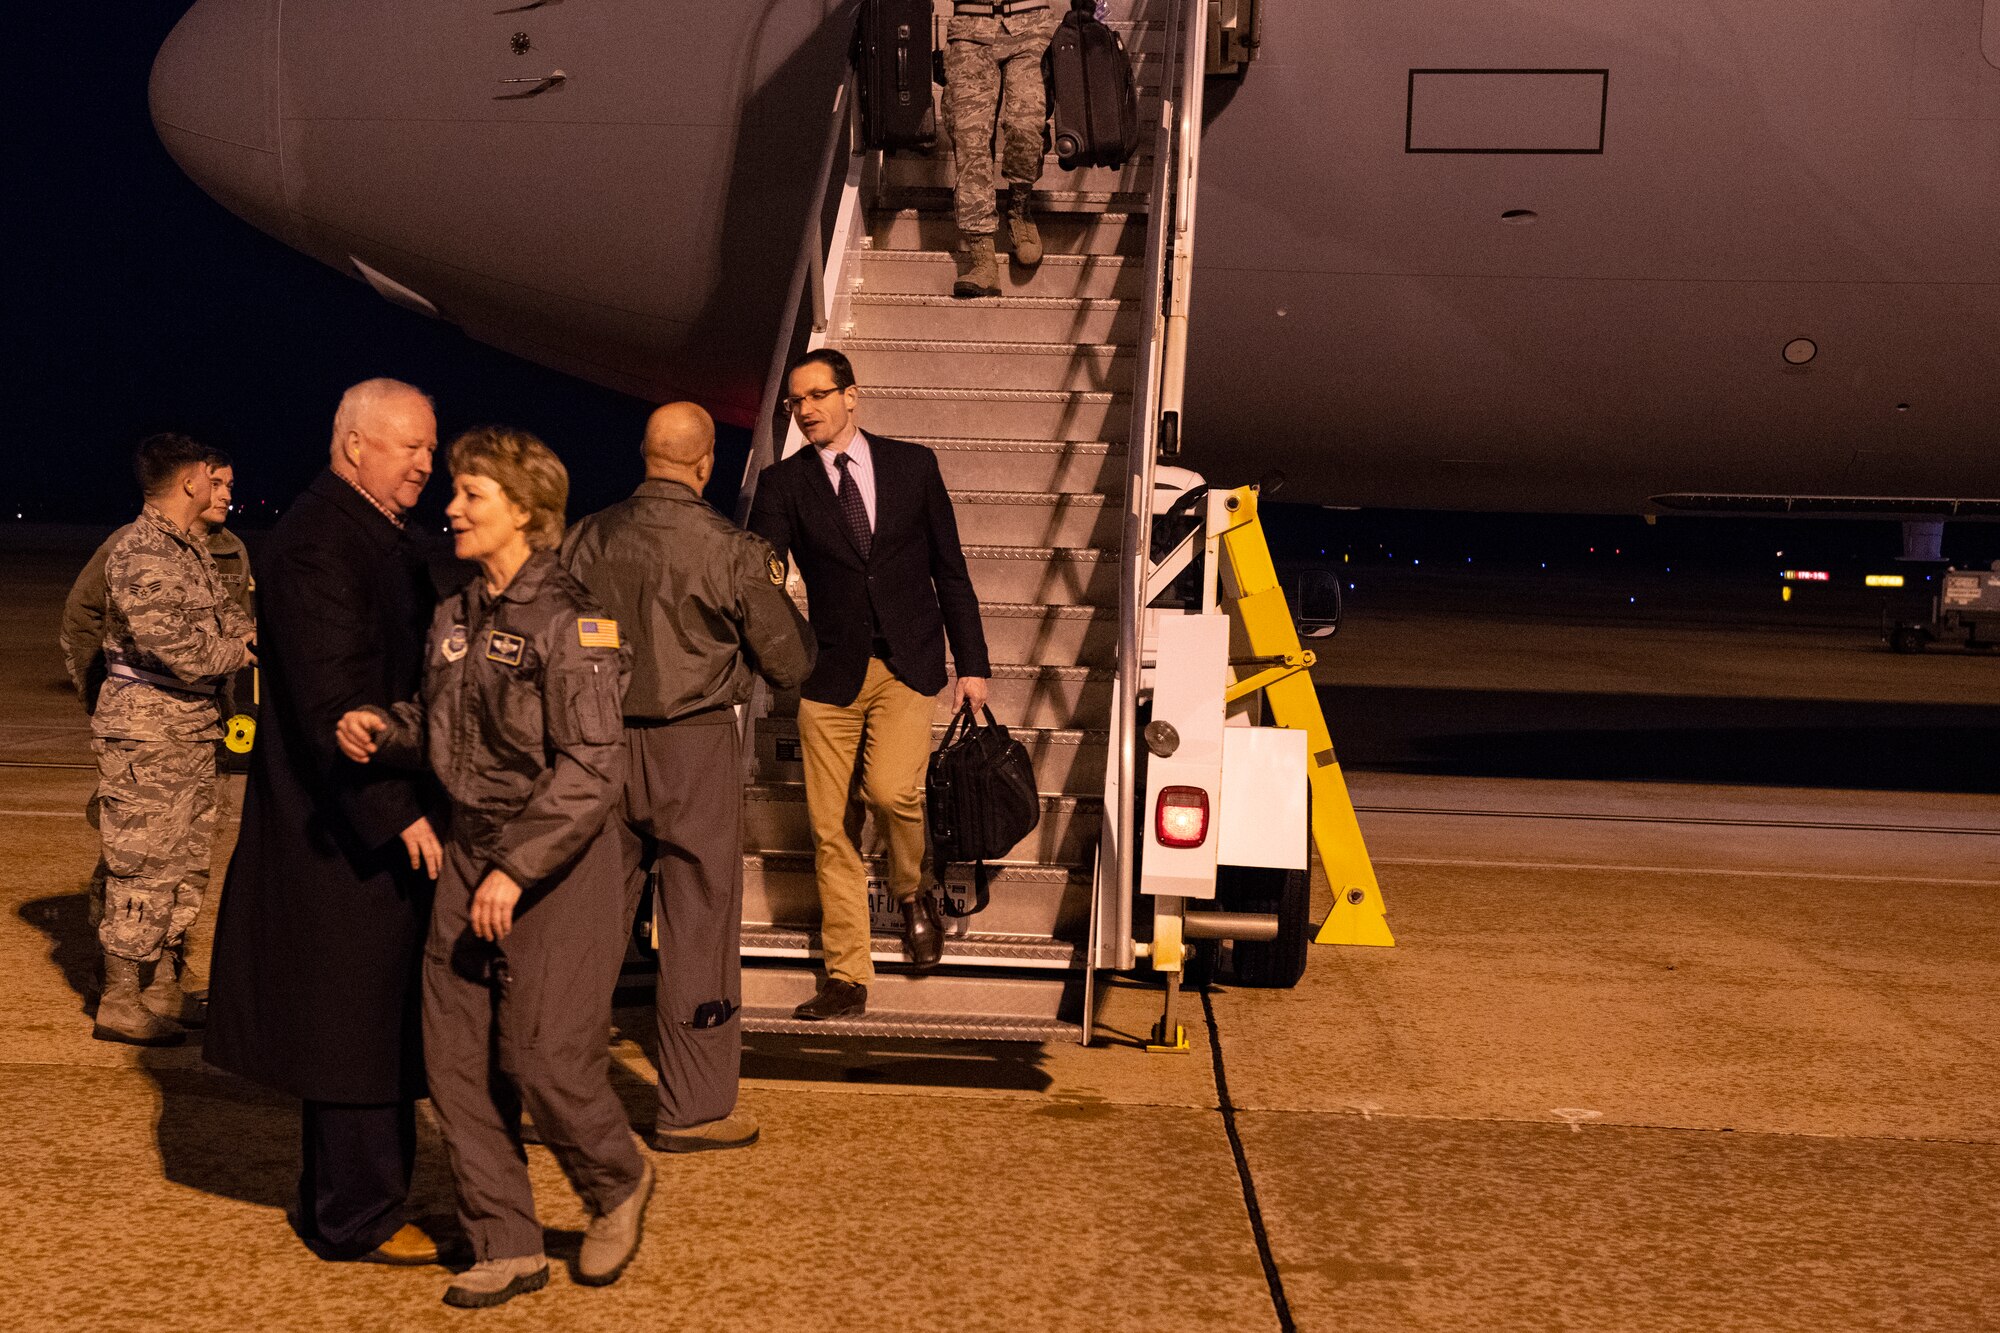 ALTUS AIR FORCE BASE, Okla. - Dr. Will Roper, Assistant Secretary of the Air Force for Acquisition, is greeted by Col. Eric Carney, 97th Air Mobility Wing commander, March 11, 2019 during the delivery of the third KC-46 Pegasus aircraft to Altus.